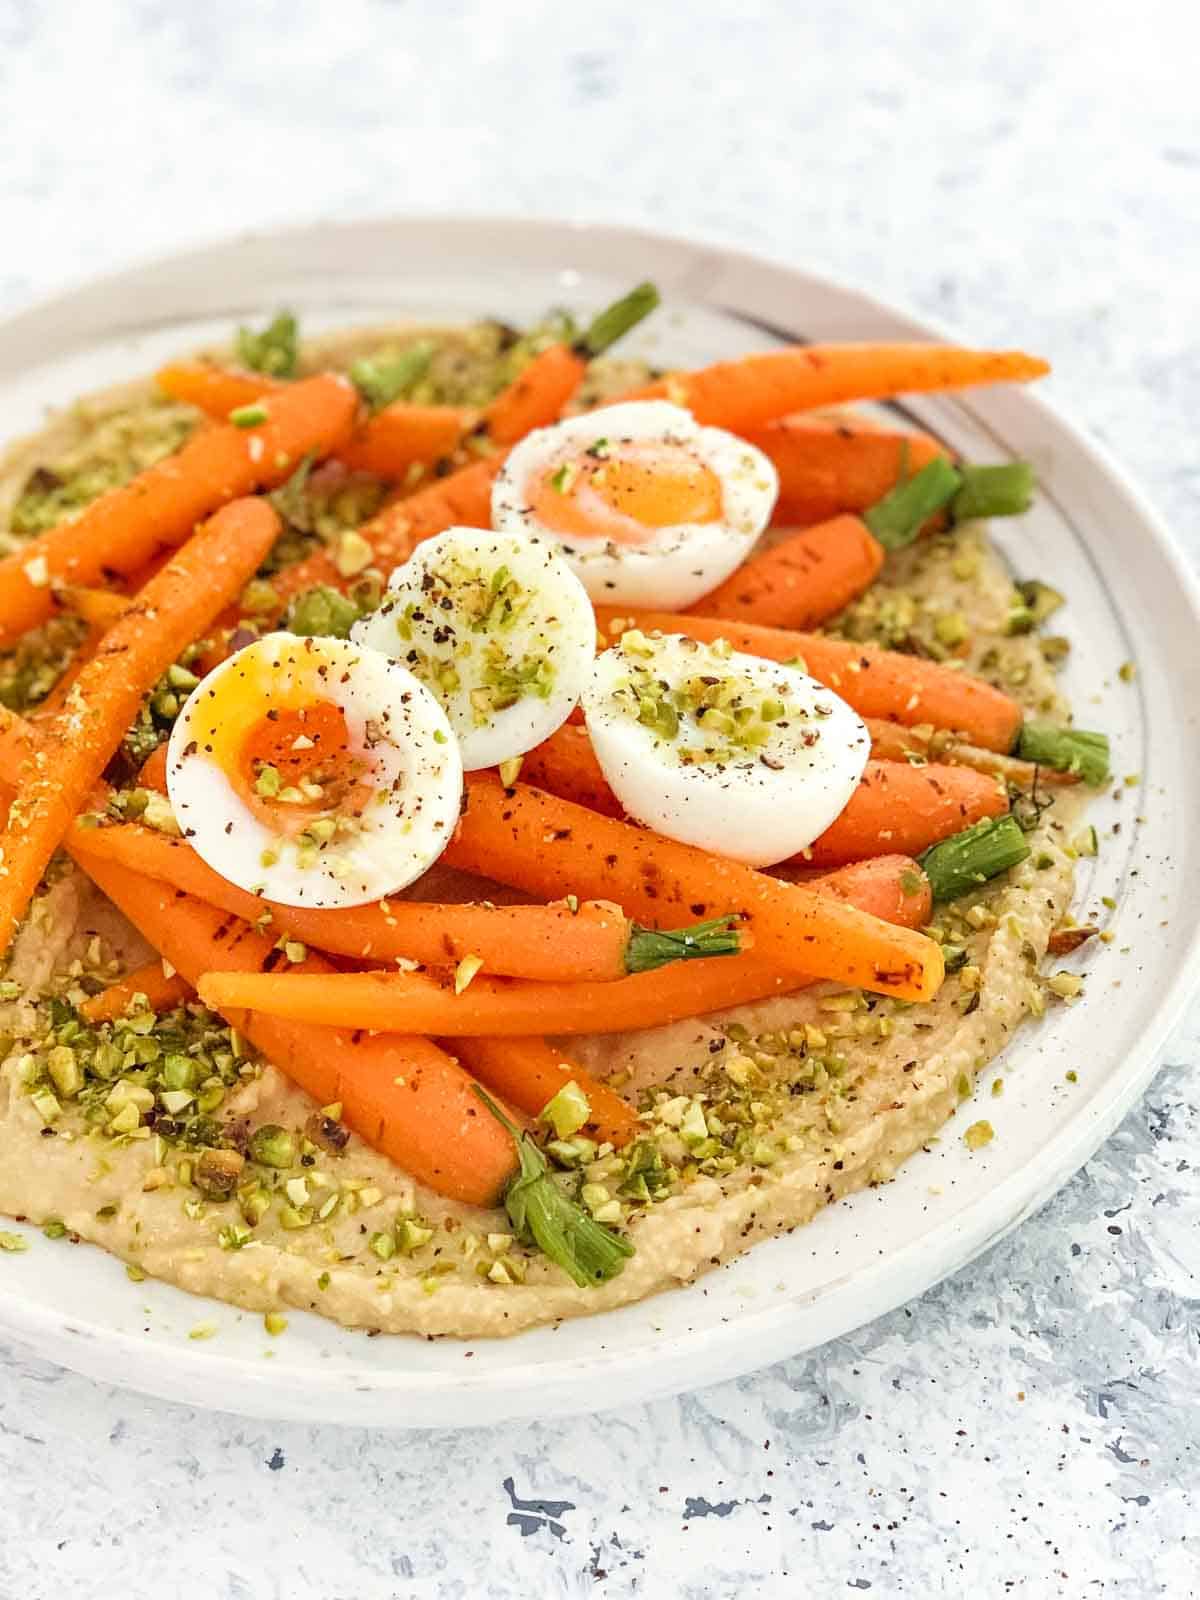 Salad of Dutch Carrots, Hummus and Soft-Boiled Eggs on a white marbled plate